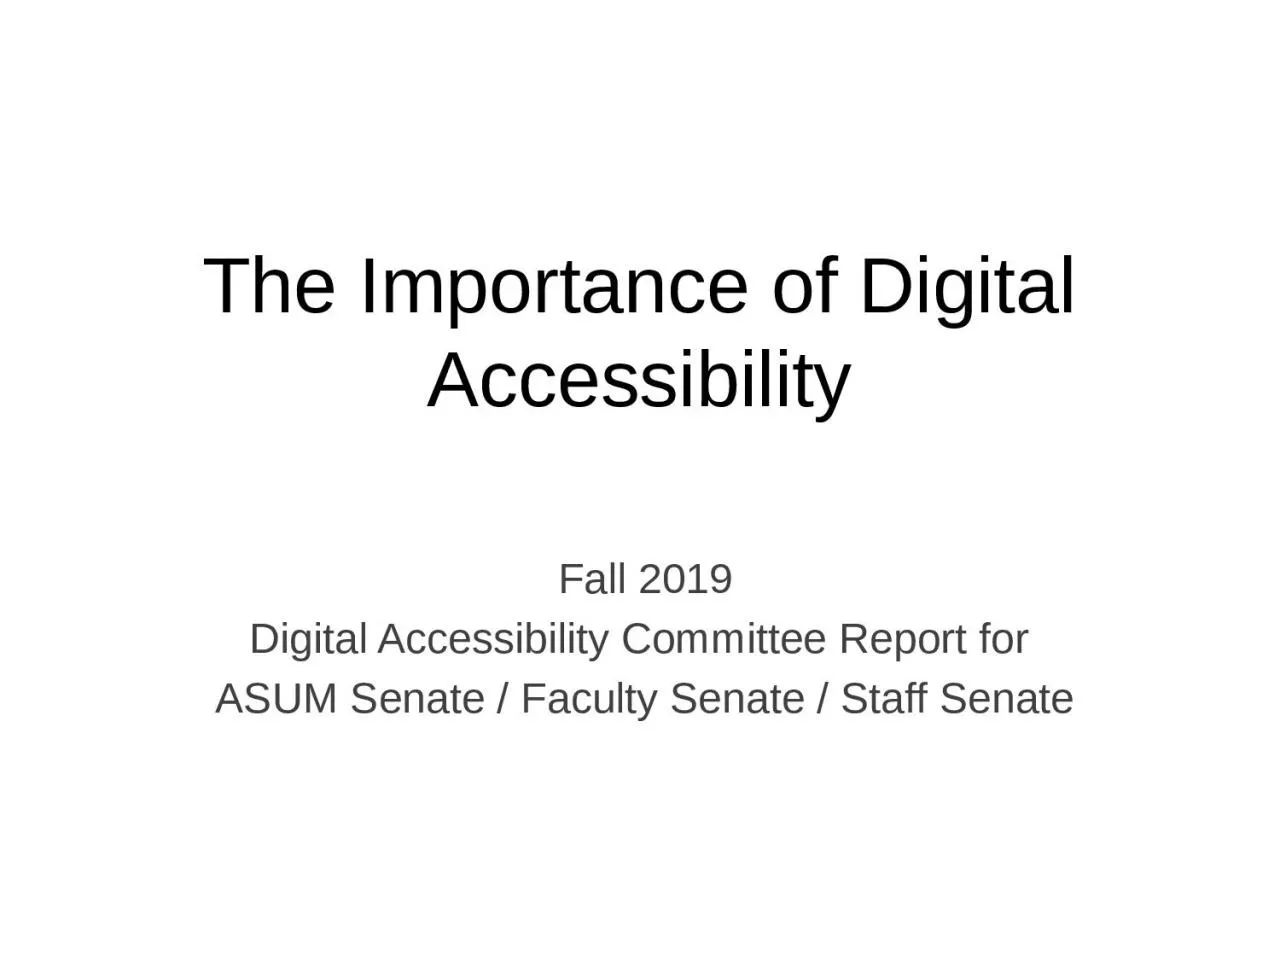 The Importance of Digital Accessibility